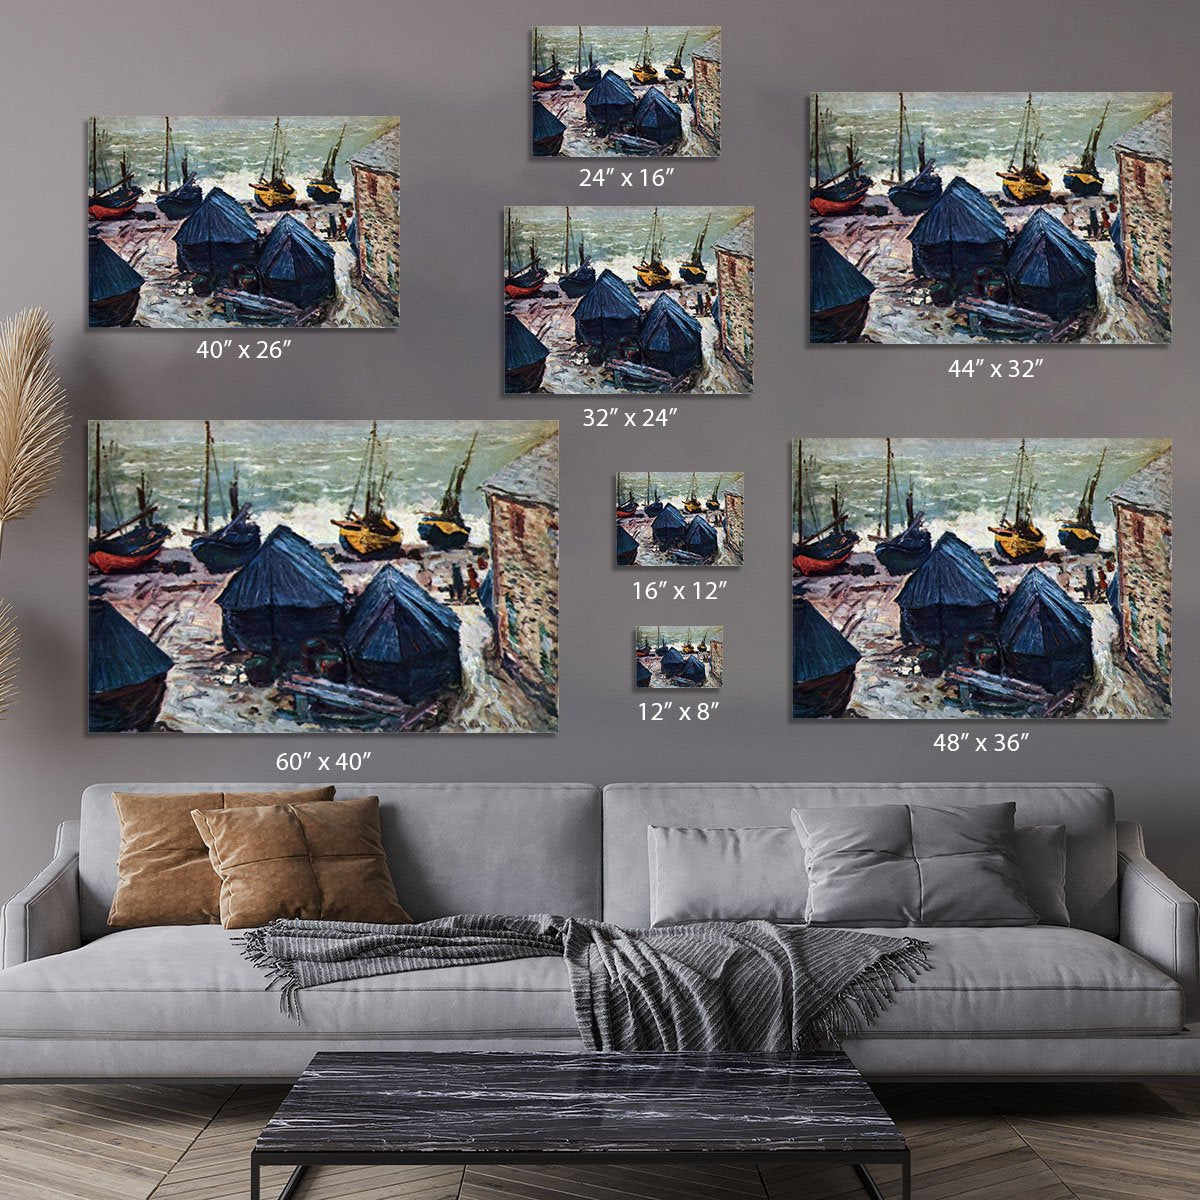 The Boats by Monet Canvas Print or Poster